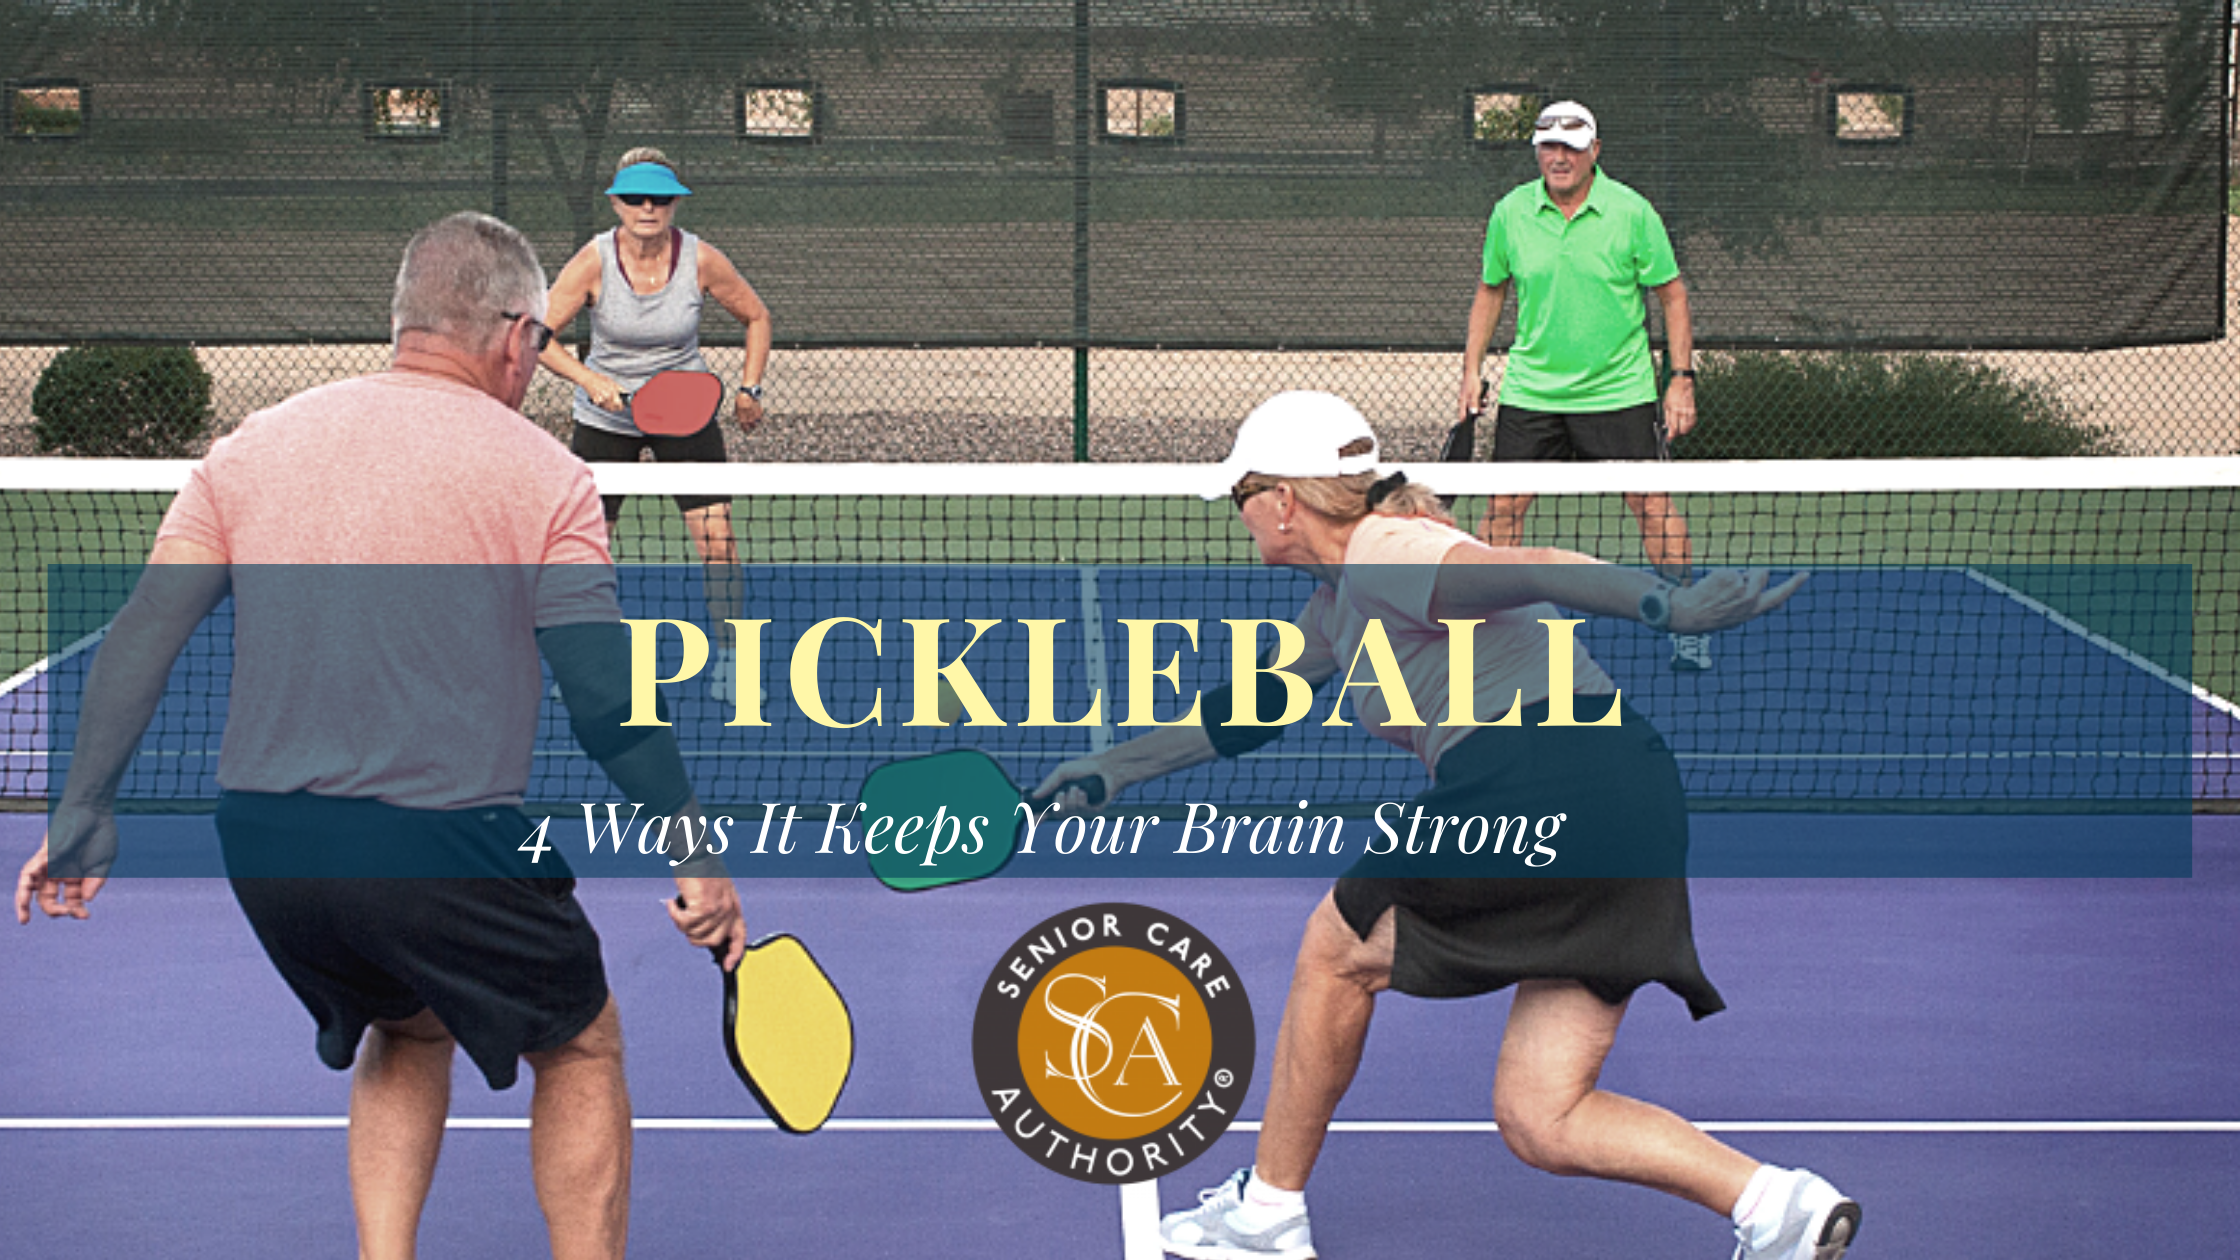 4 Reasons Pickleball Keeps Your Brain Strong